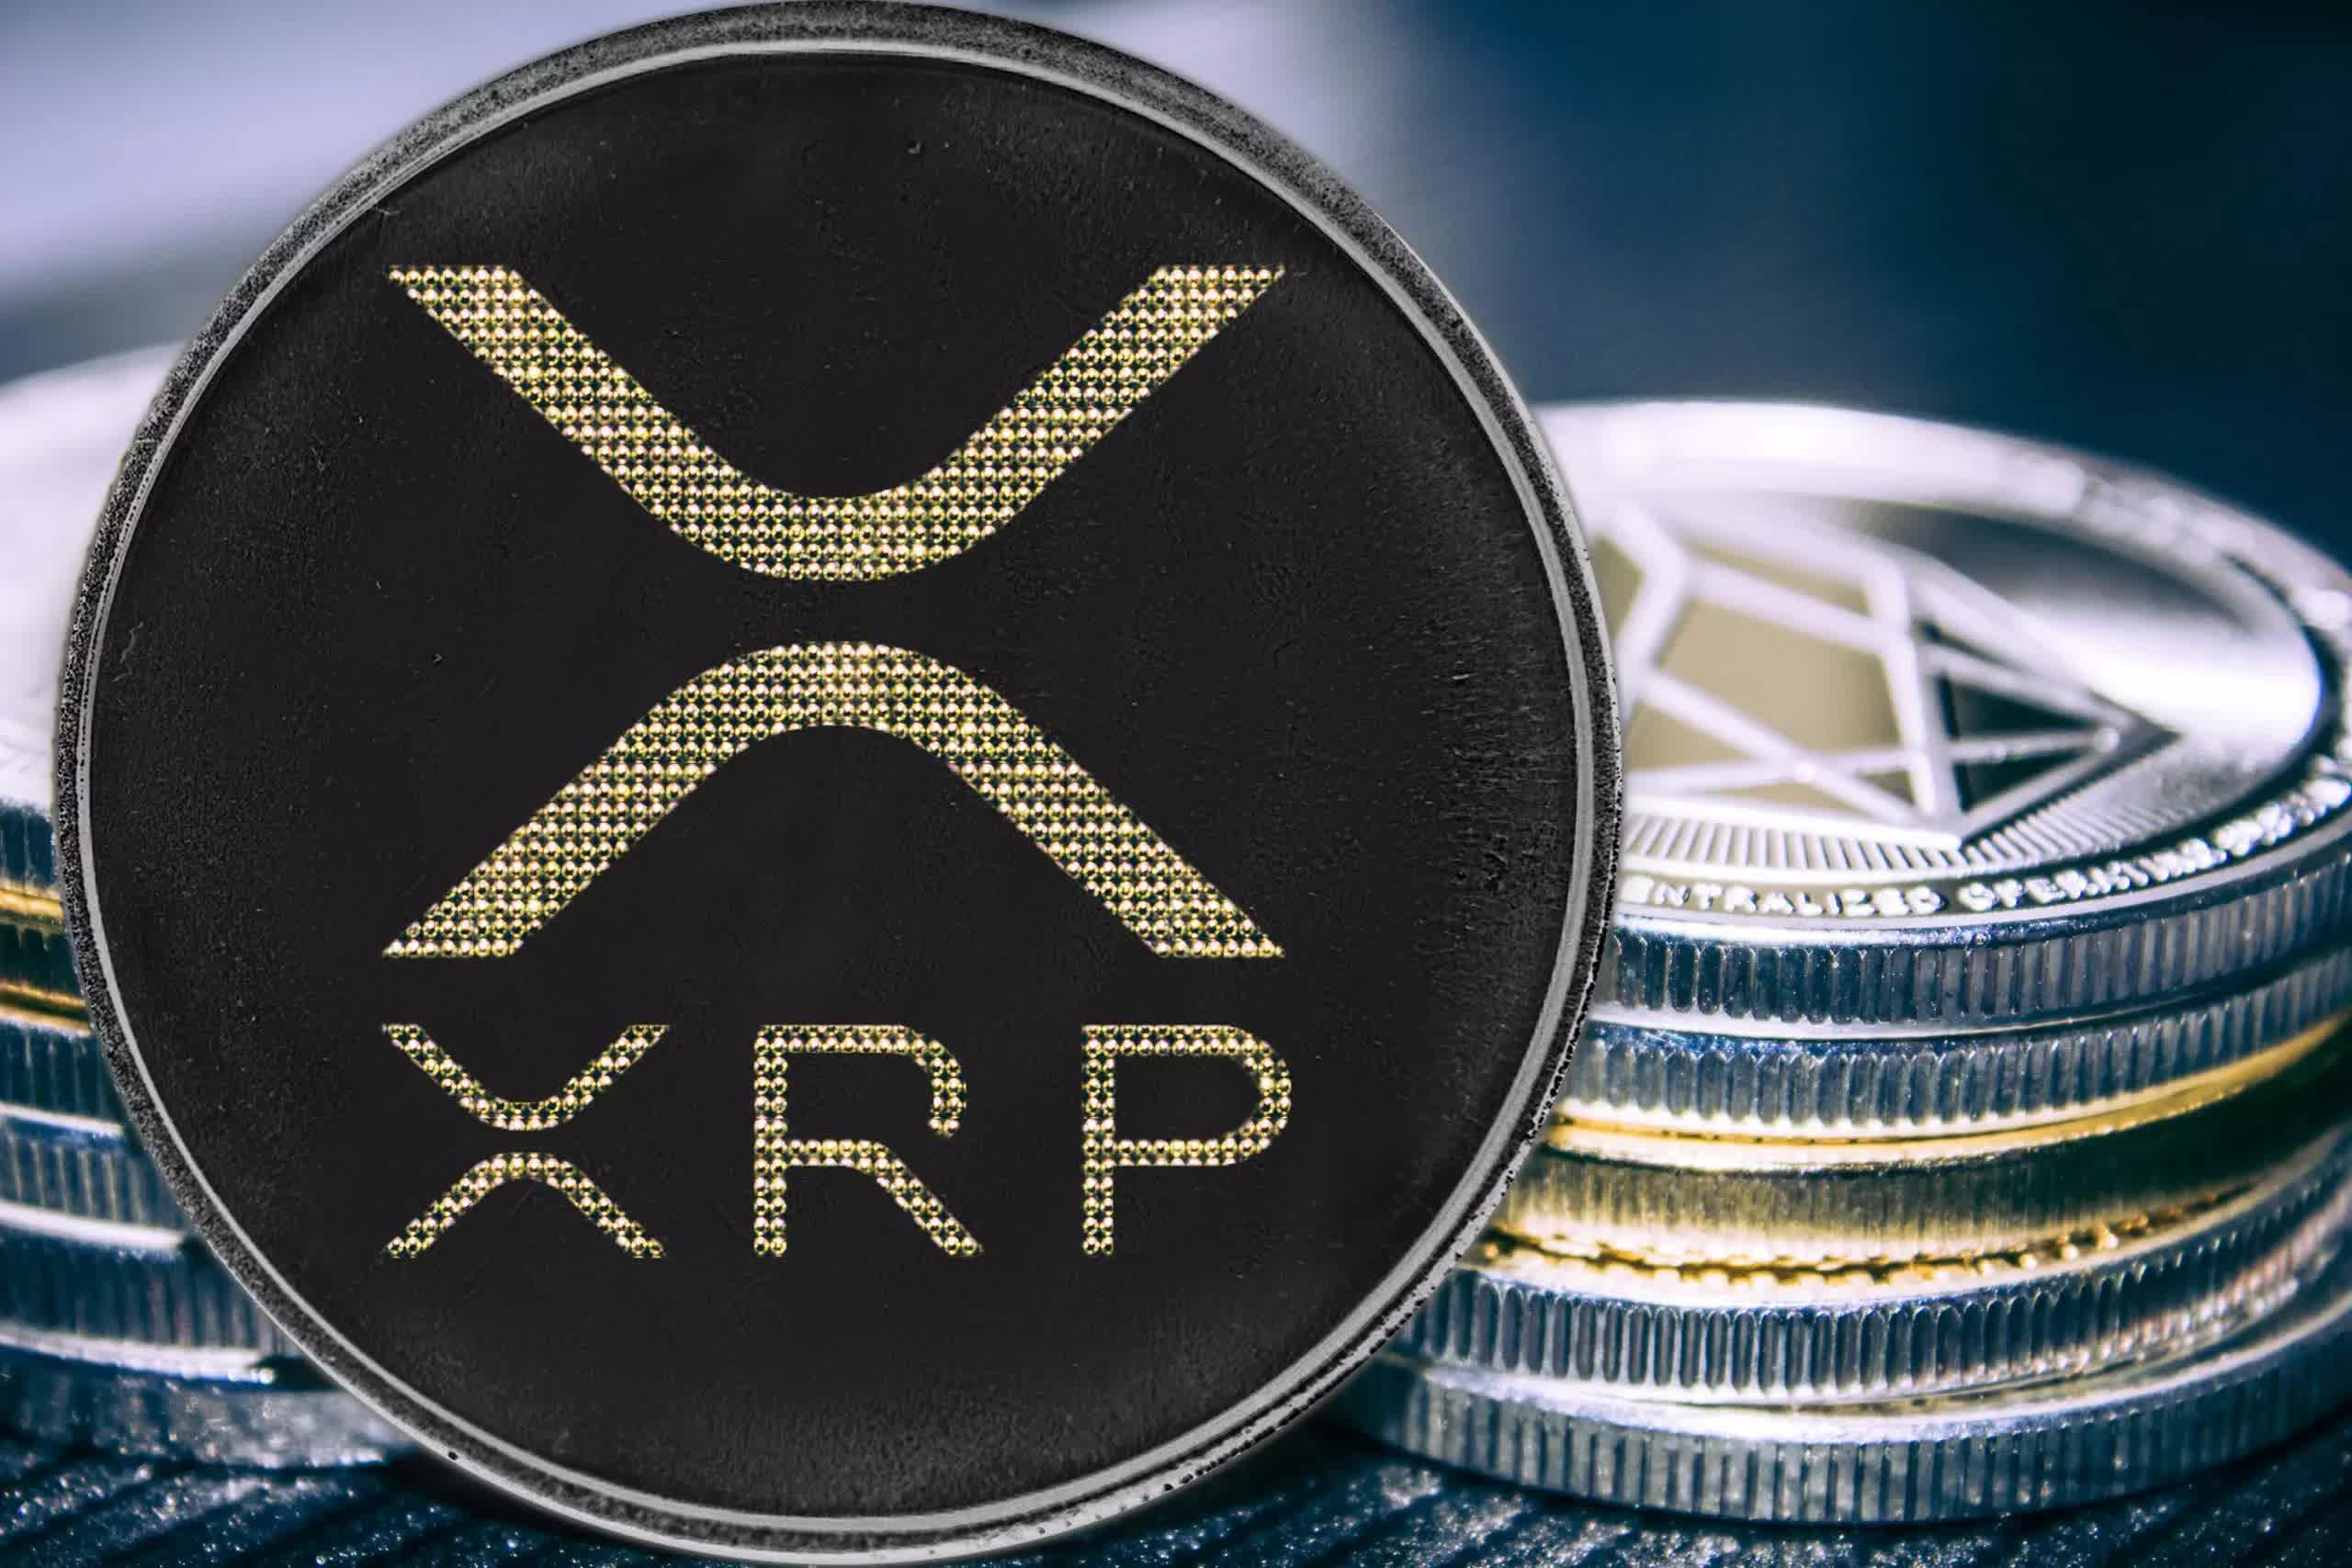 SEC lawsuit against Ripple prompts Coinbase to suspend trading of XRP